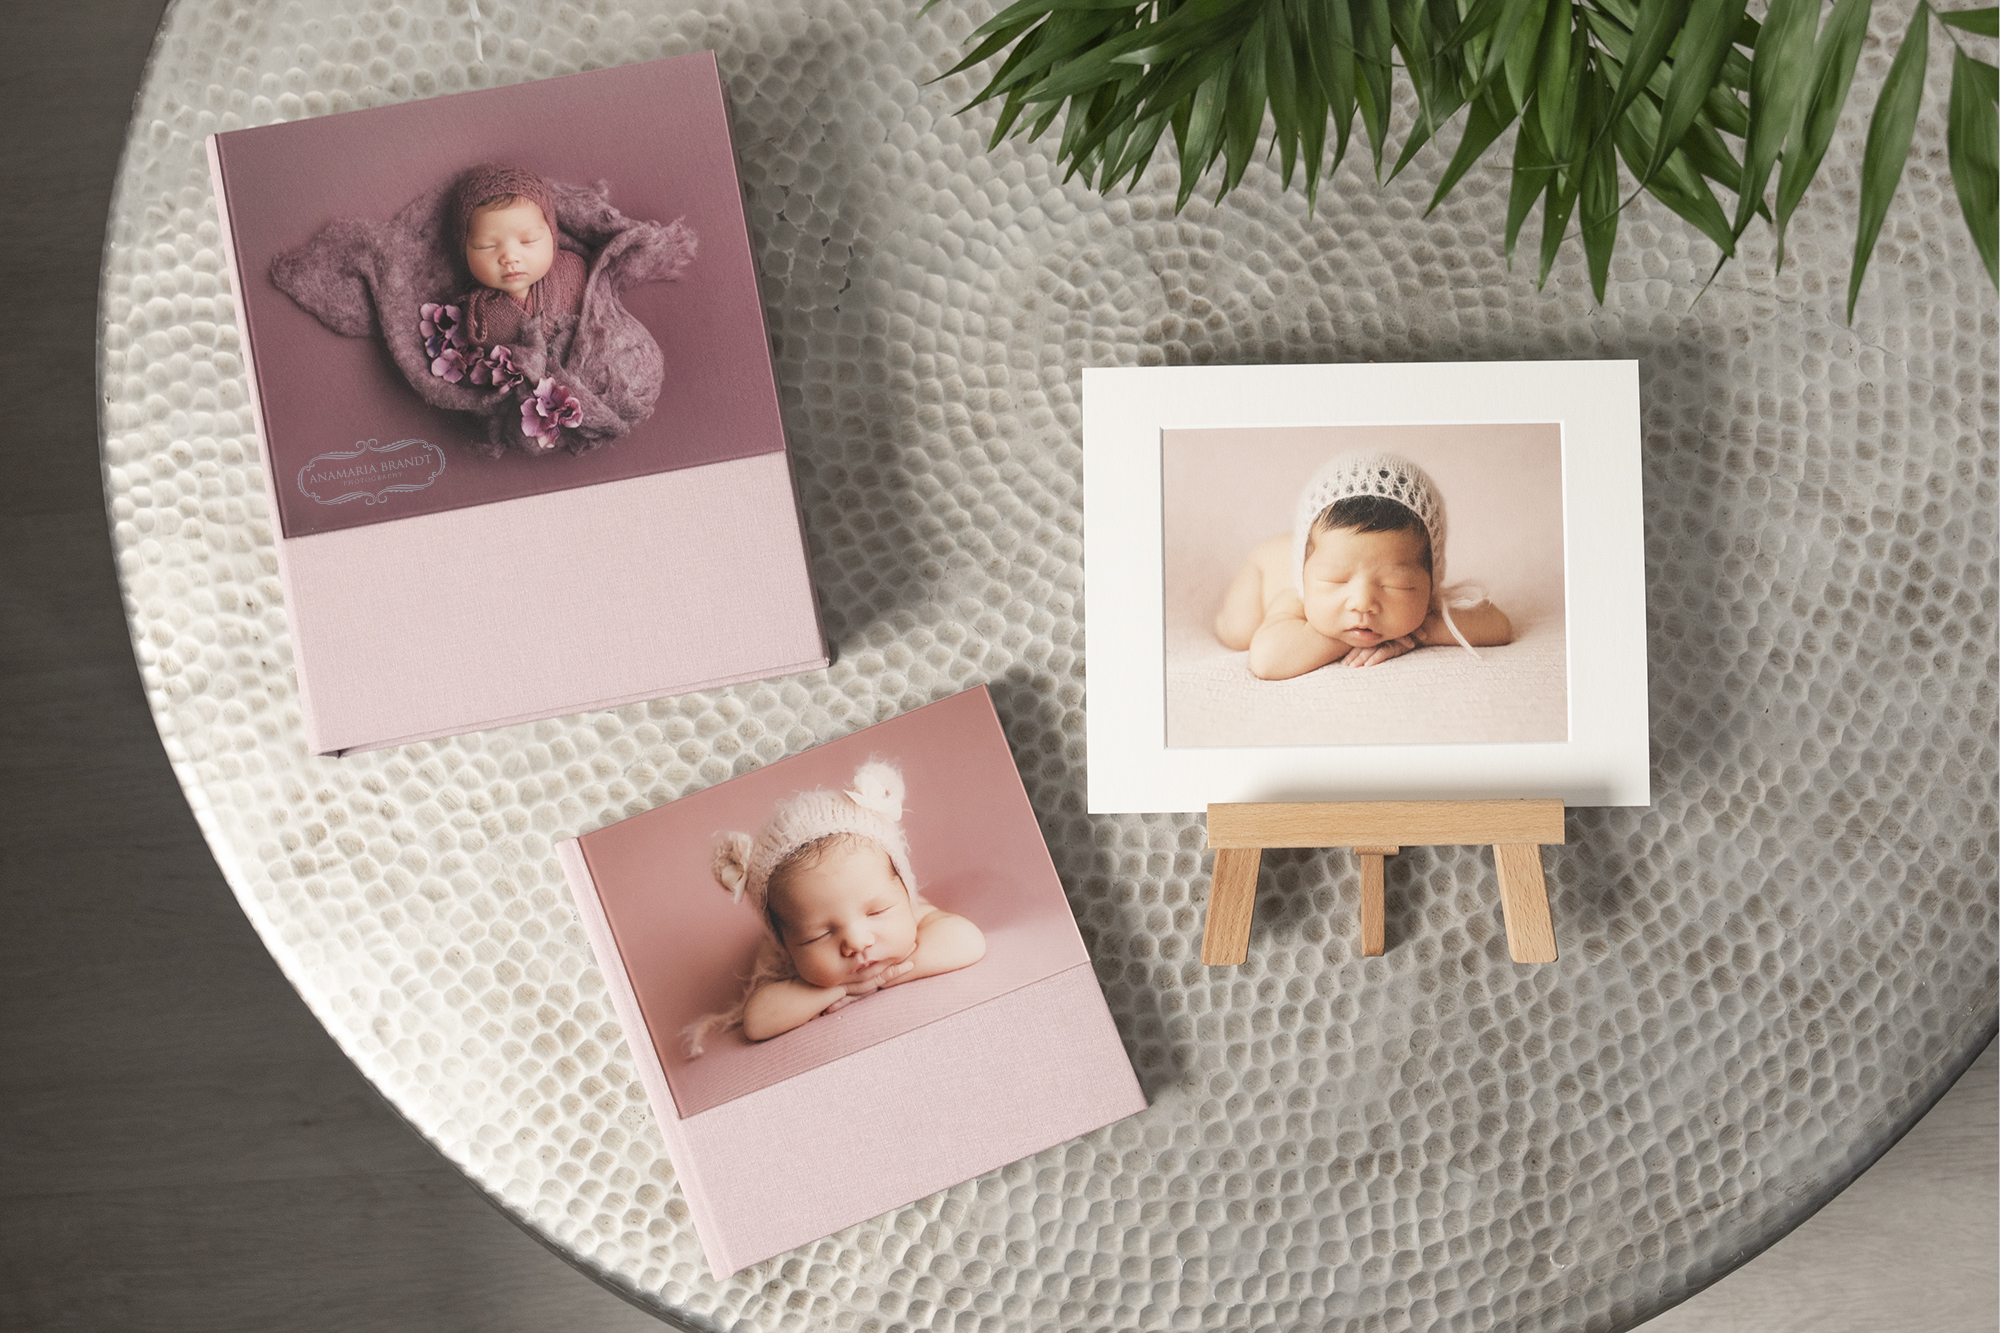 nPhoto Albums and Matted Print